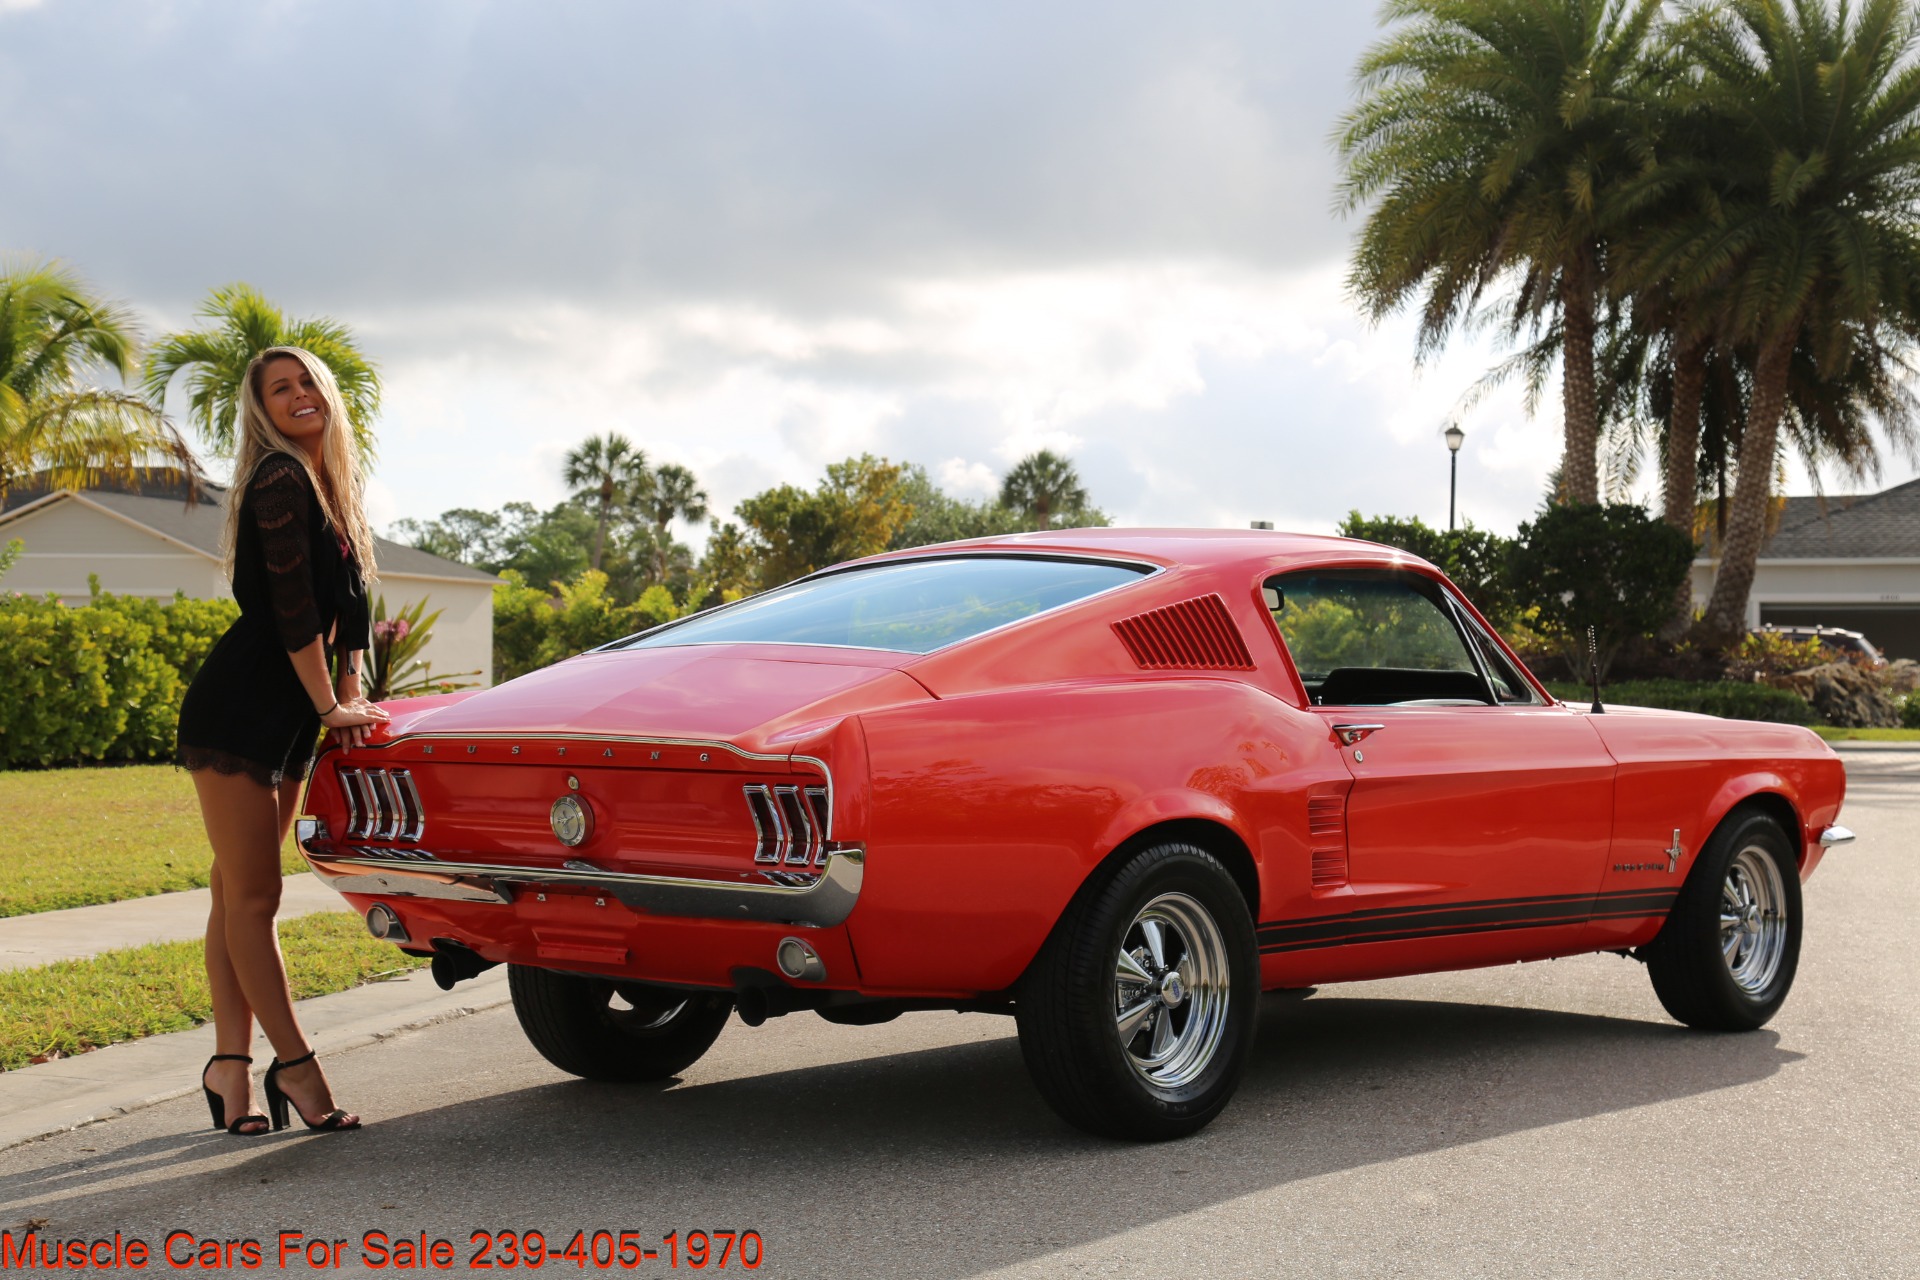 Used 1967 Ford Mustang For Sale ($32,500) | Muscle Cars for Sale Inc ...